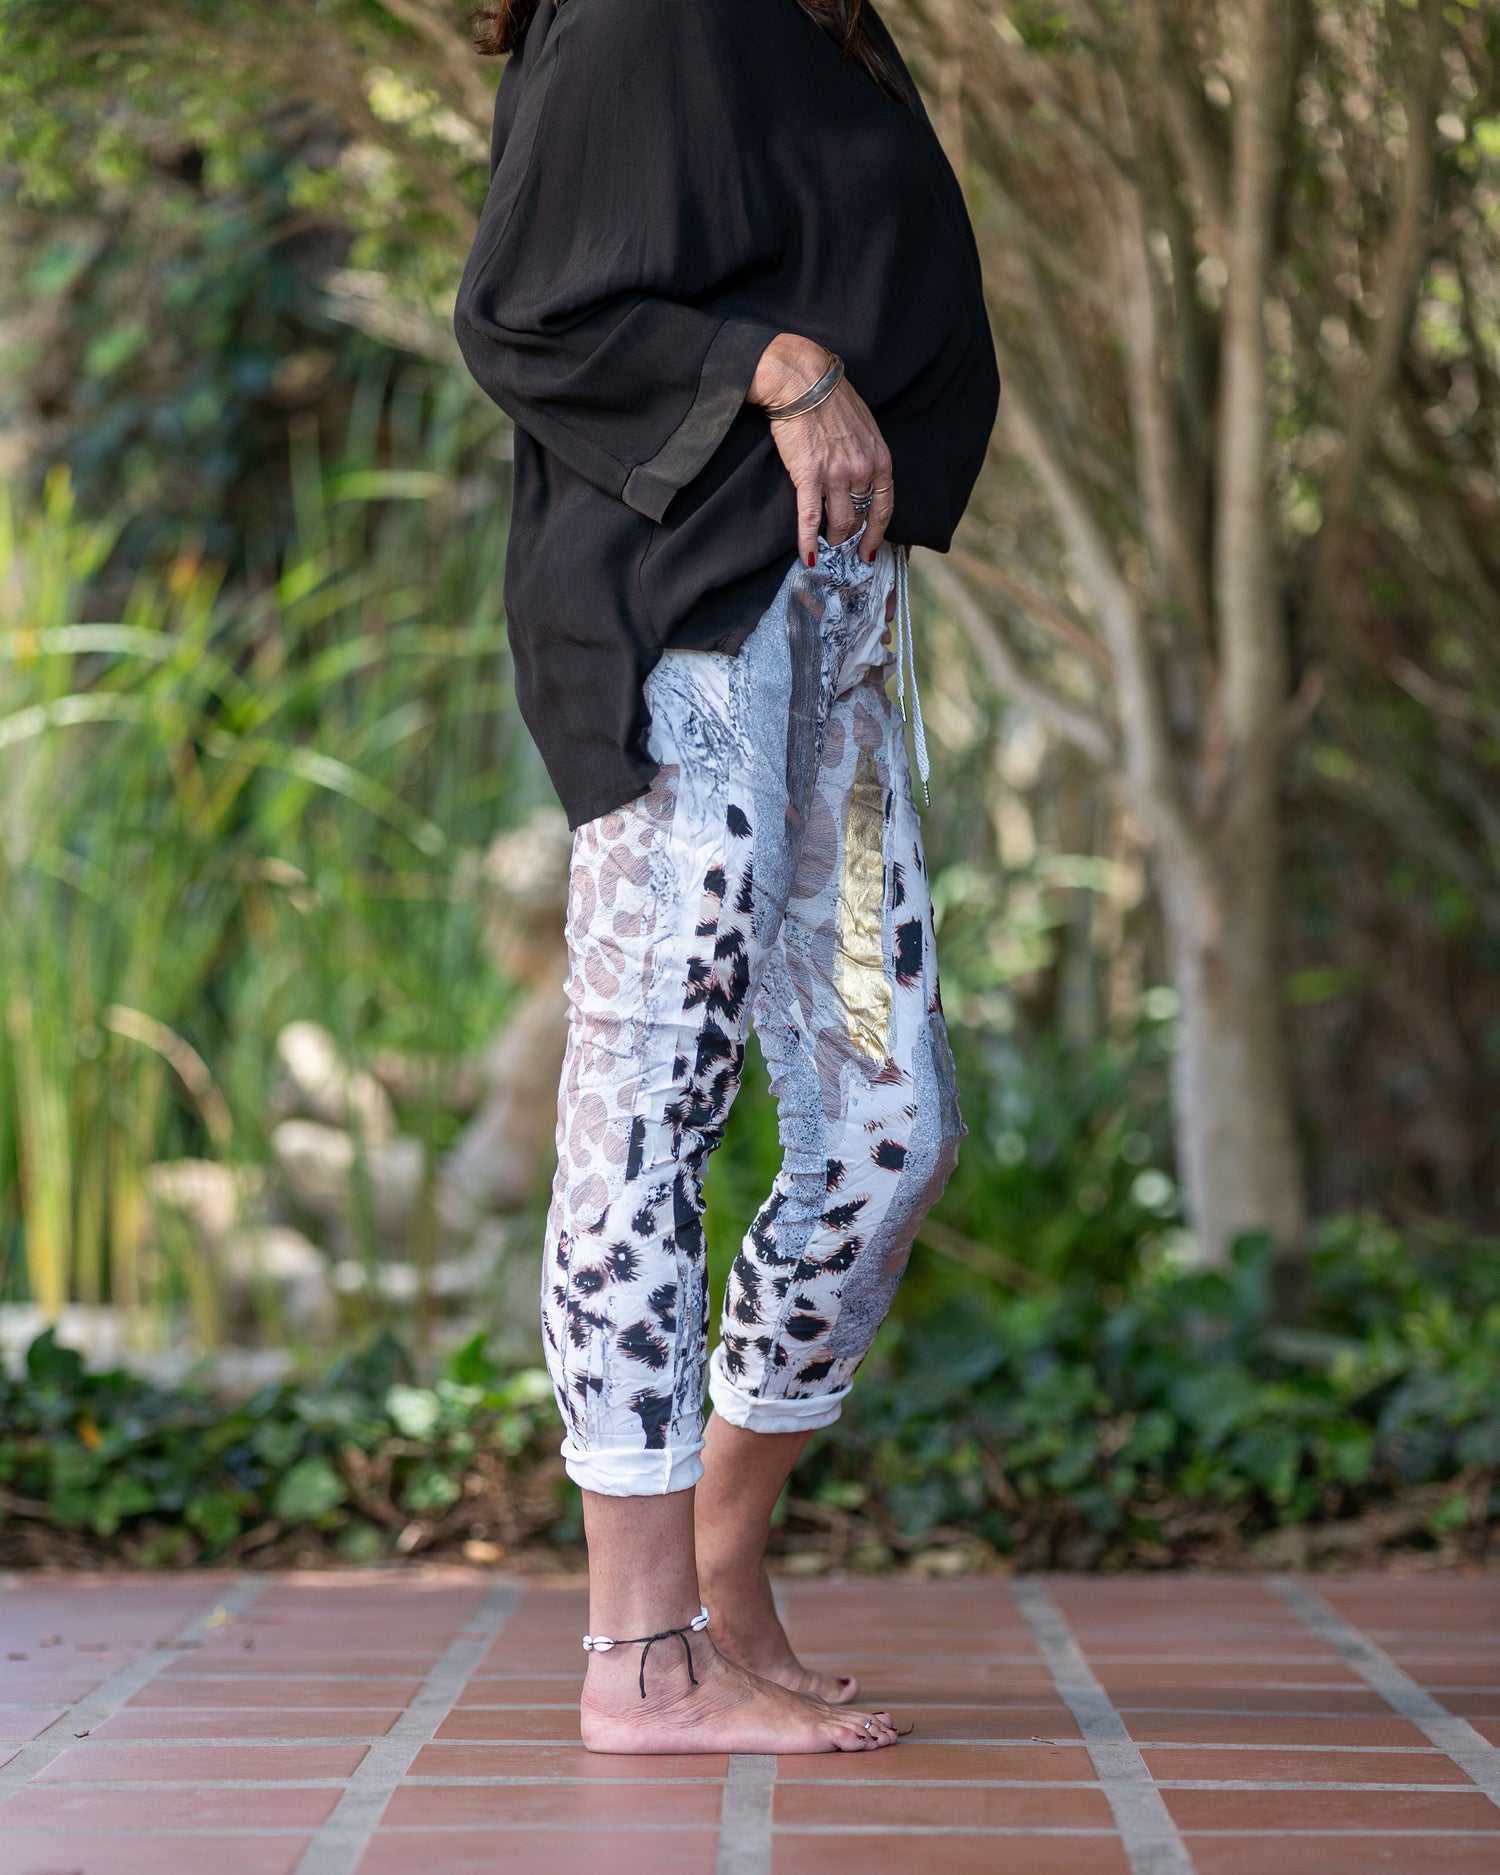 Our italian drawstring pants are known and loved by everyone. This pair offers exceptional comfort with a soft feel against your skin. Beautiful silver foil print with a eye catching animal print adds a touch of playfulness to design. The pairing options are endless for this pair